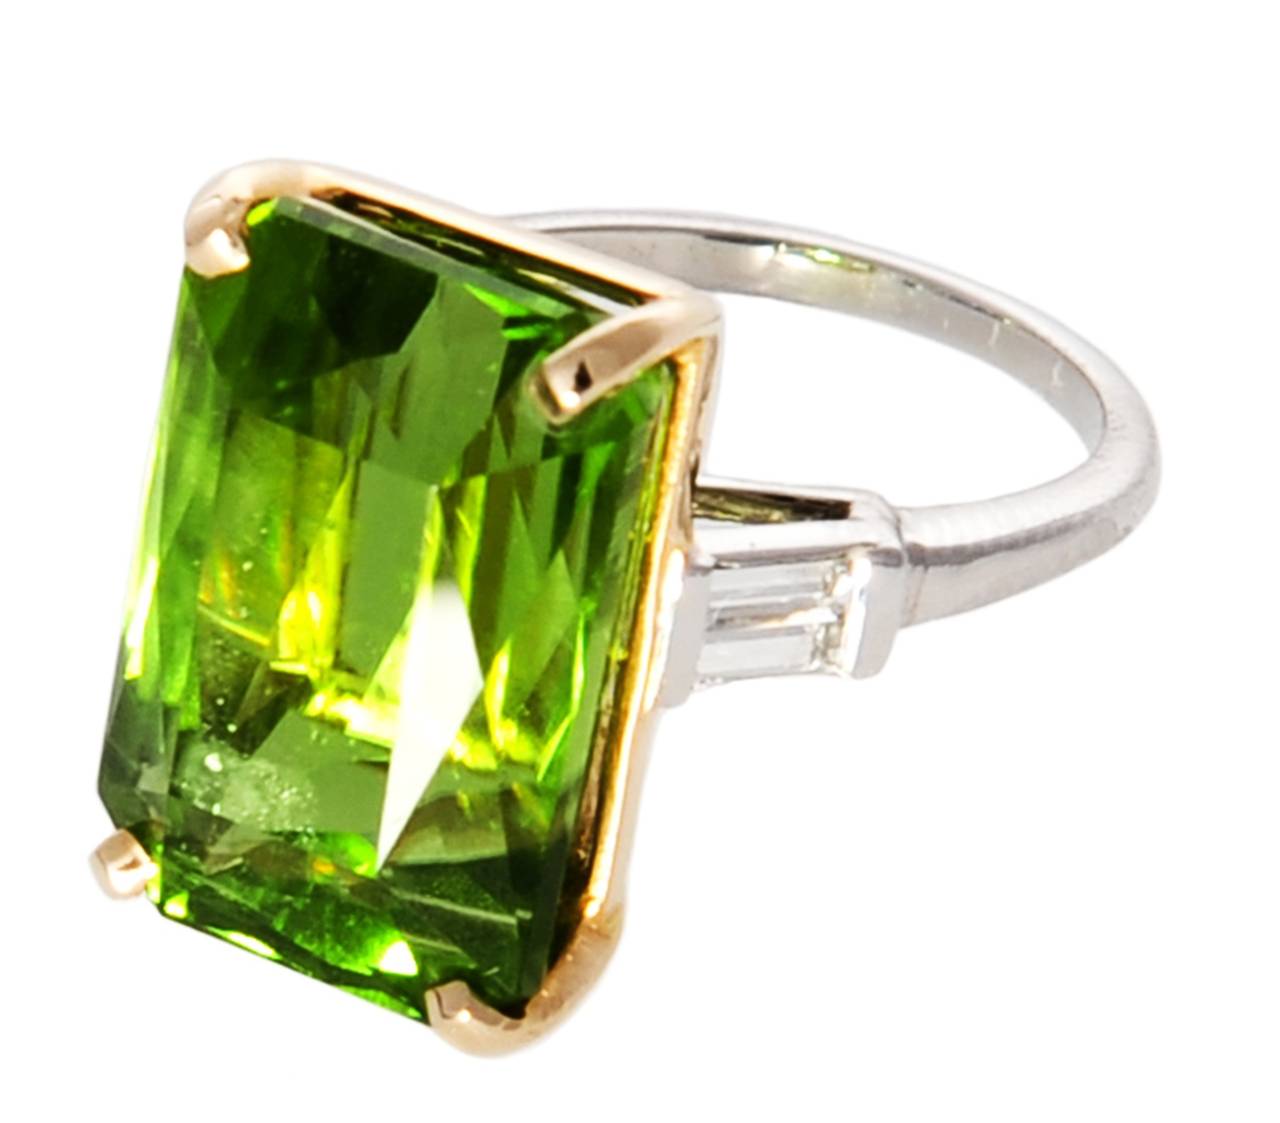 A beautiful lady's ring showing a clear Peridot approx. 19ct, 2 baguette cut diamonds VS2-SI1 total 0,35ct, size 6,25, resizeable